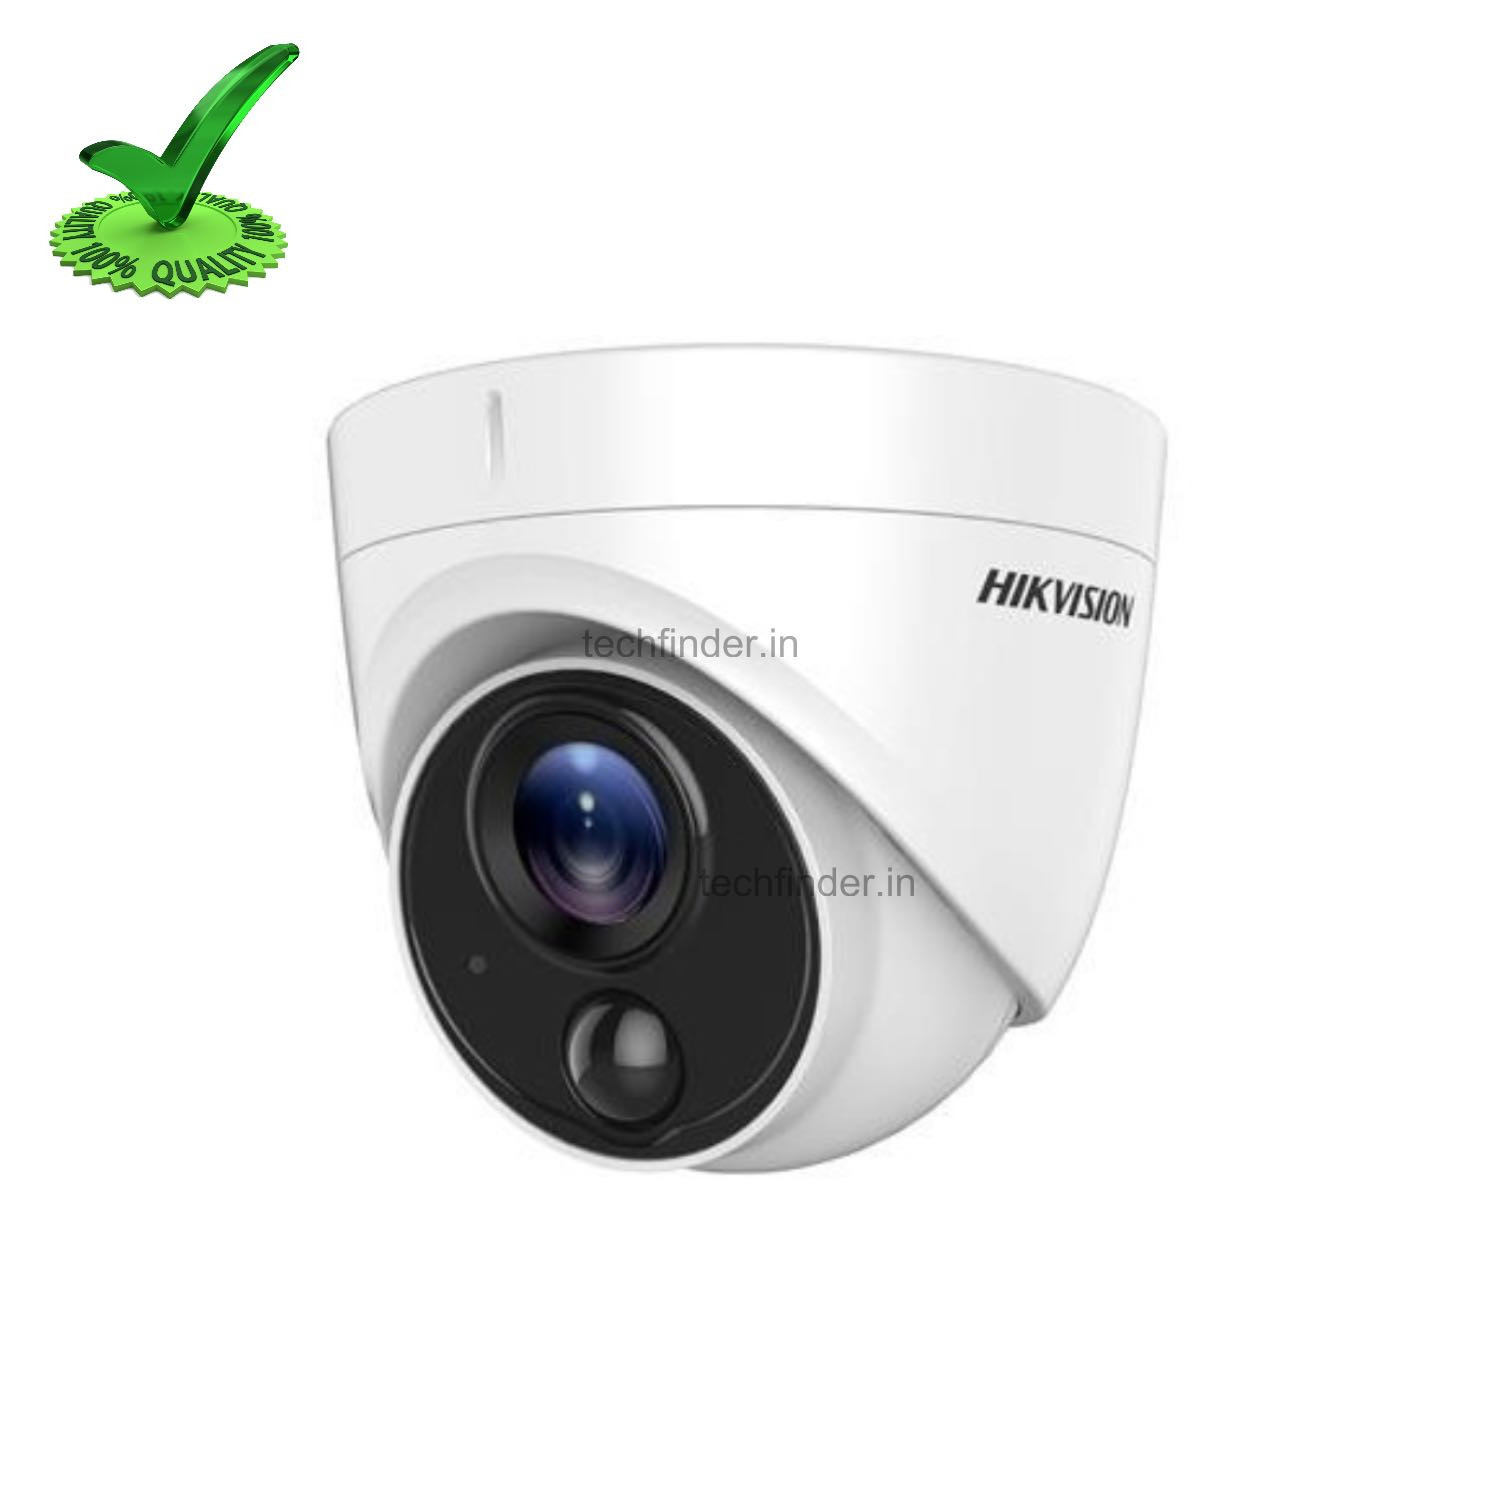 Hikvision DS-2CE71D0T-PIRL0 2MP Semi Metal HD Dome Camera